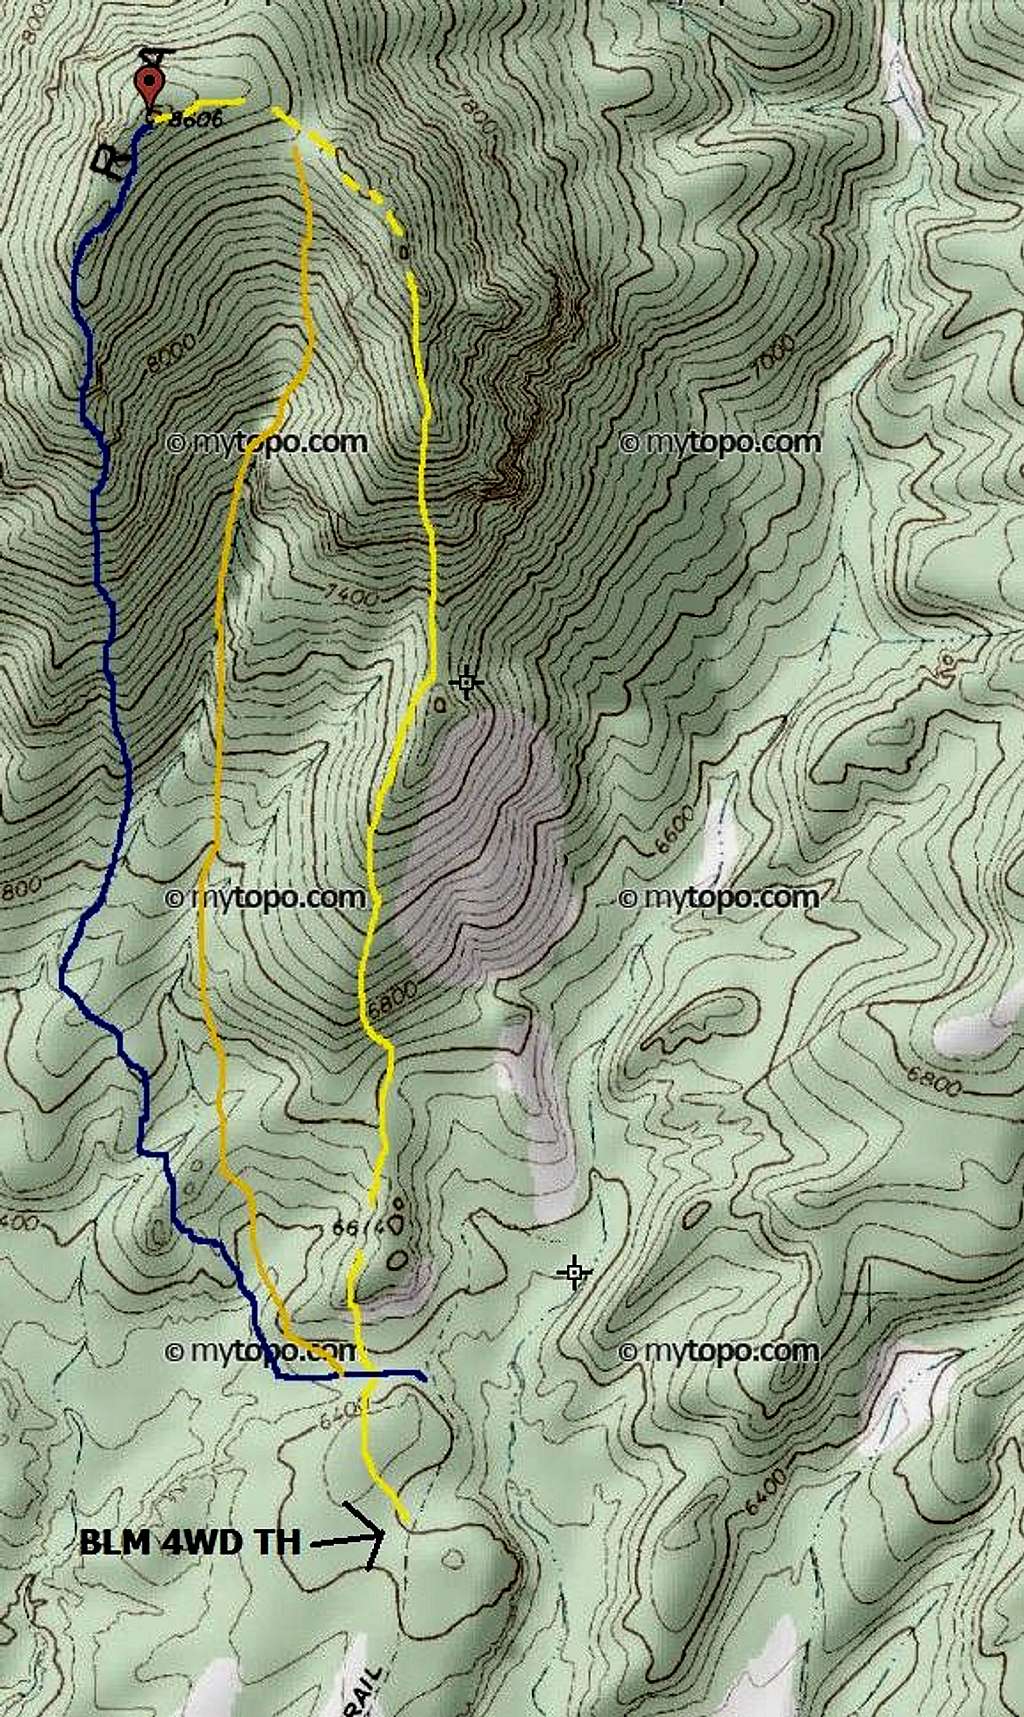 APPROXIMATE routes up Seaman